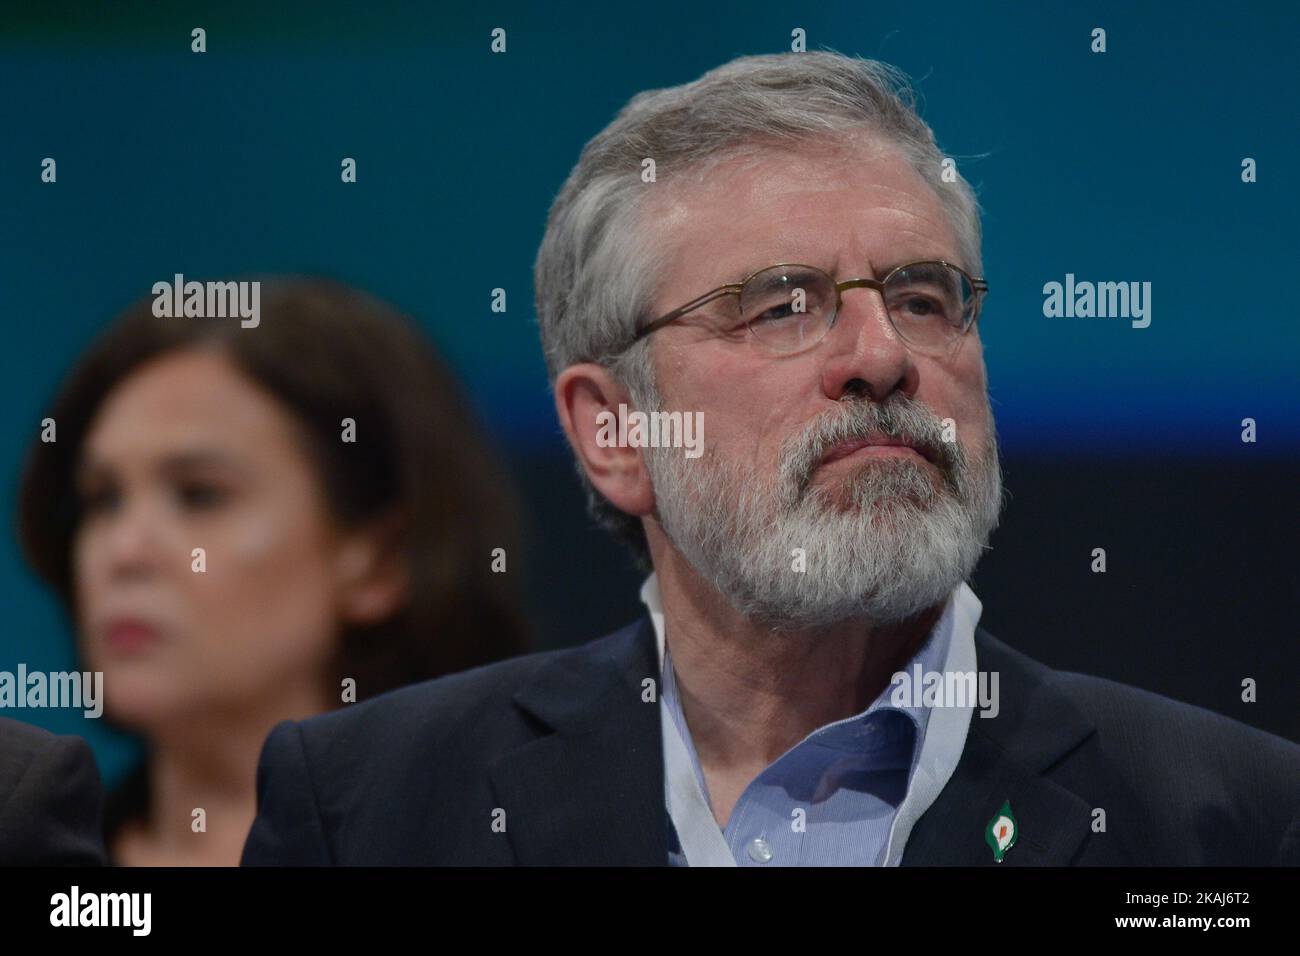 The Sinn Fein party's leader, Gerry Adams, and The party's deputy leader, Mary Lou McDonald (in the backgground), at the Sinn Fein Ard Fheis 2016 that gets under way in Dublin's Convention Center this evening with around 2,000 delegates set to more than 100 motions over the next two days, including topics like 1916 Centenary and Irish Unity, the achievements of the peace process and the ongoing challenge of reconciliation, the health and water charges. Dublin, Ireland, on Friday, 22 April 2016. *** Please Use Credit from Credit Field *** Stock Photo